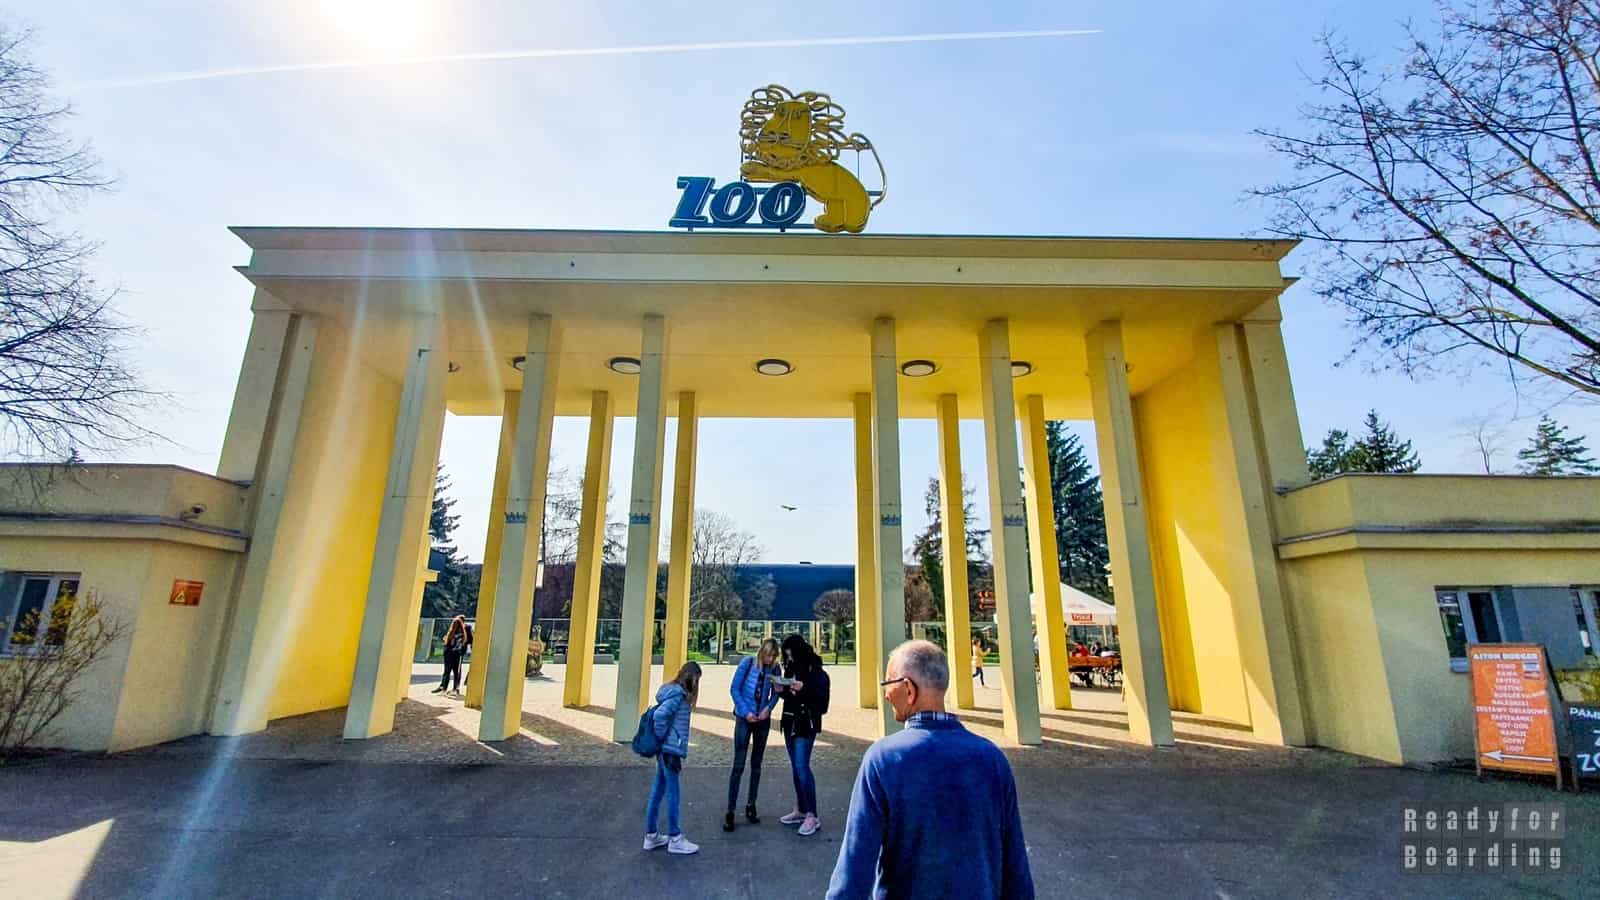 Wroclaw Zoo and the Afrykarium in Wroclaw